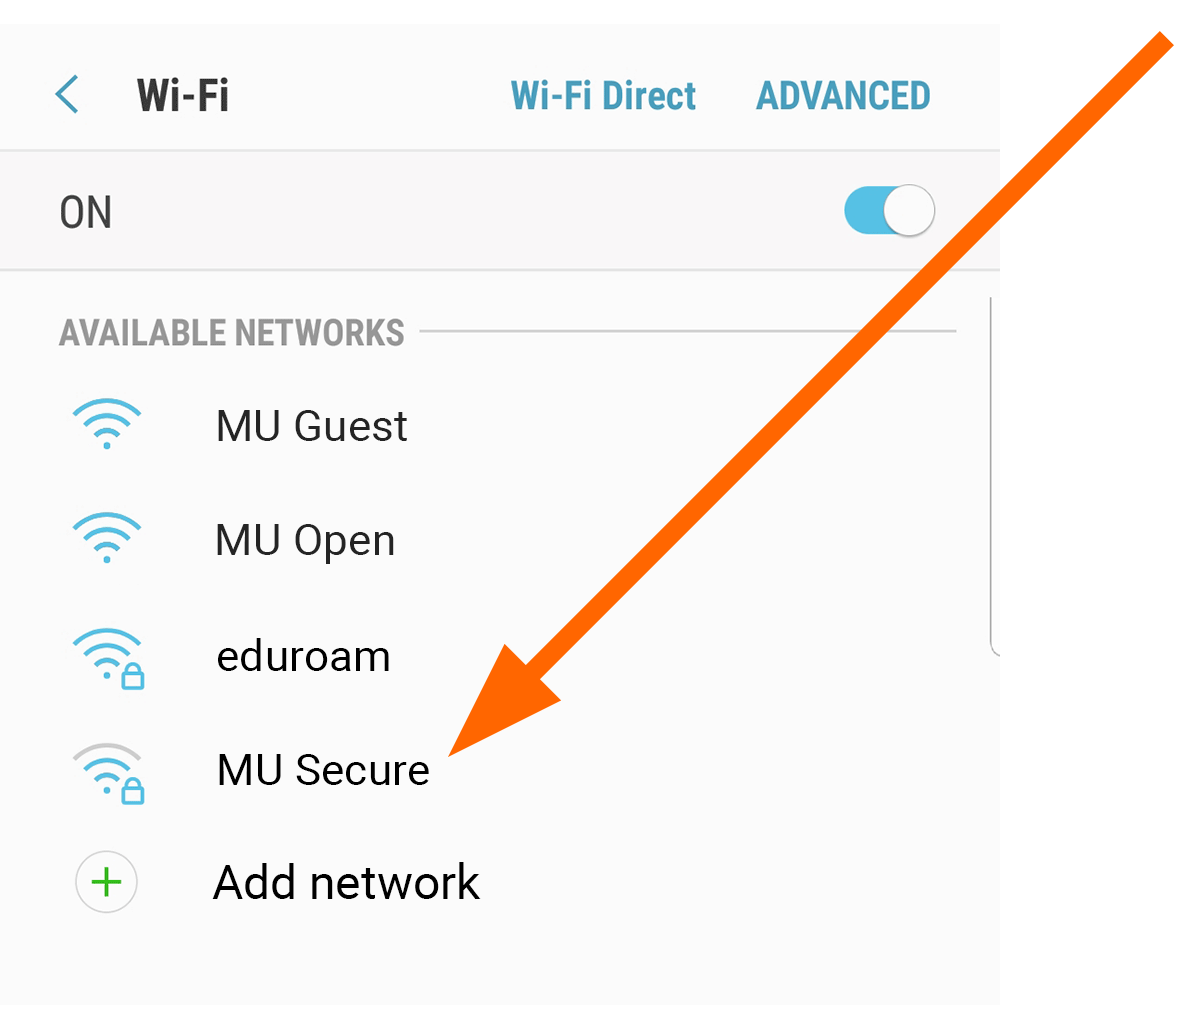 Wi-Fi choices with MU Secure identified with an arrow